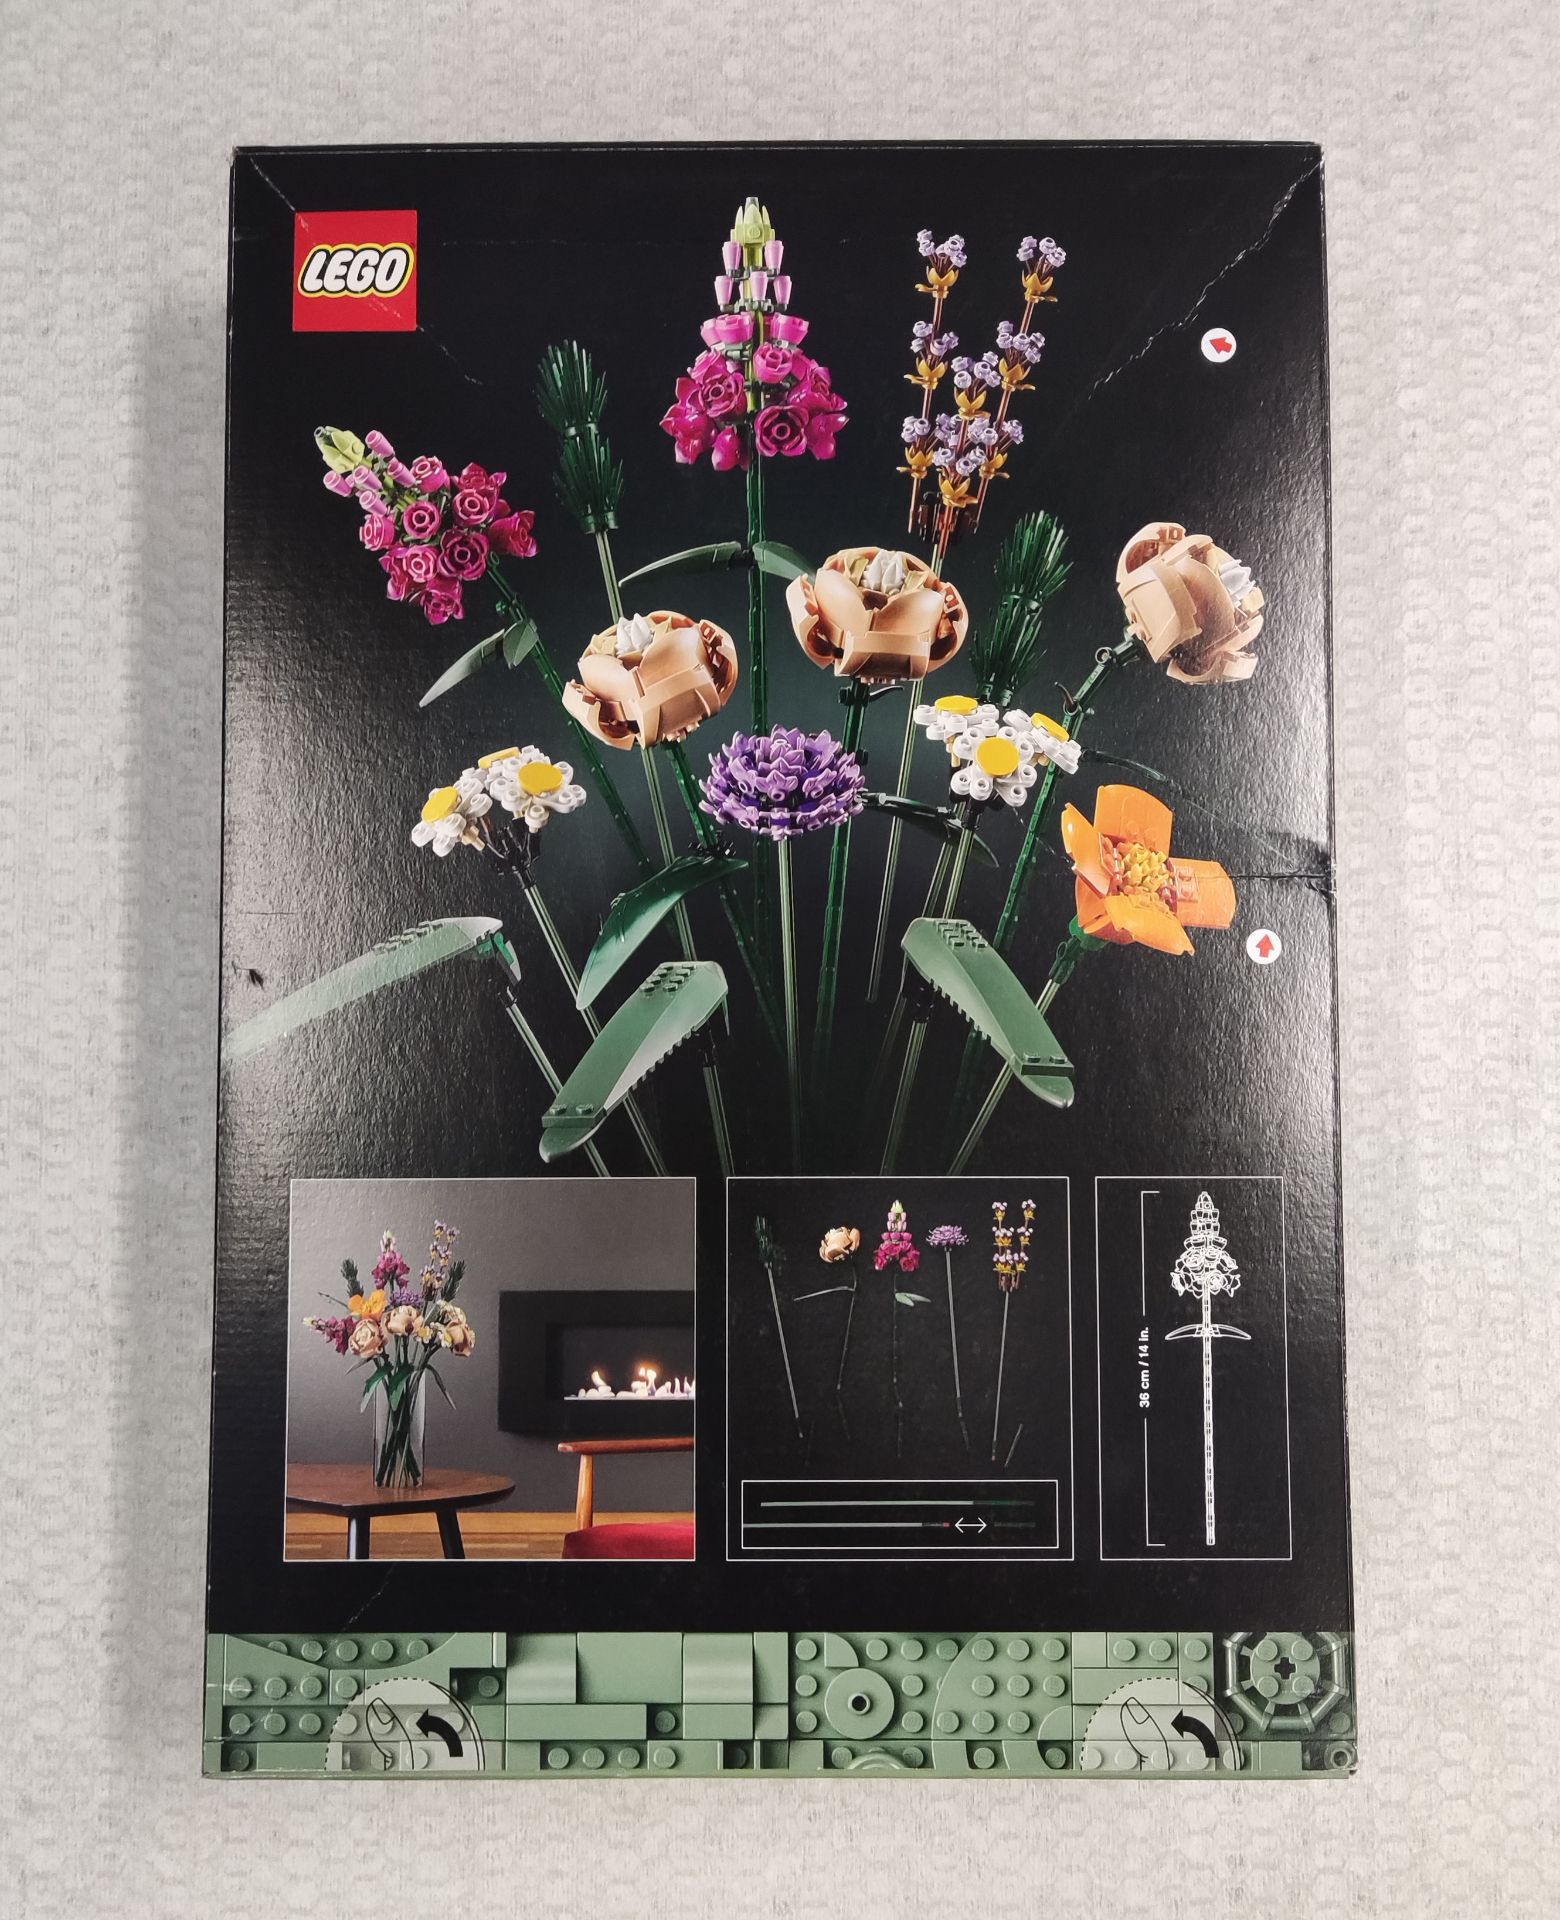 1 x Lego Botanical Collection Flower Bouquet - Model 10280 - New/Boxed - Image 3 of 8